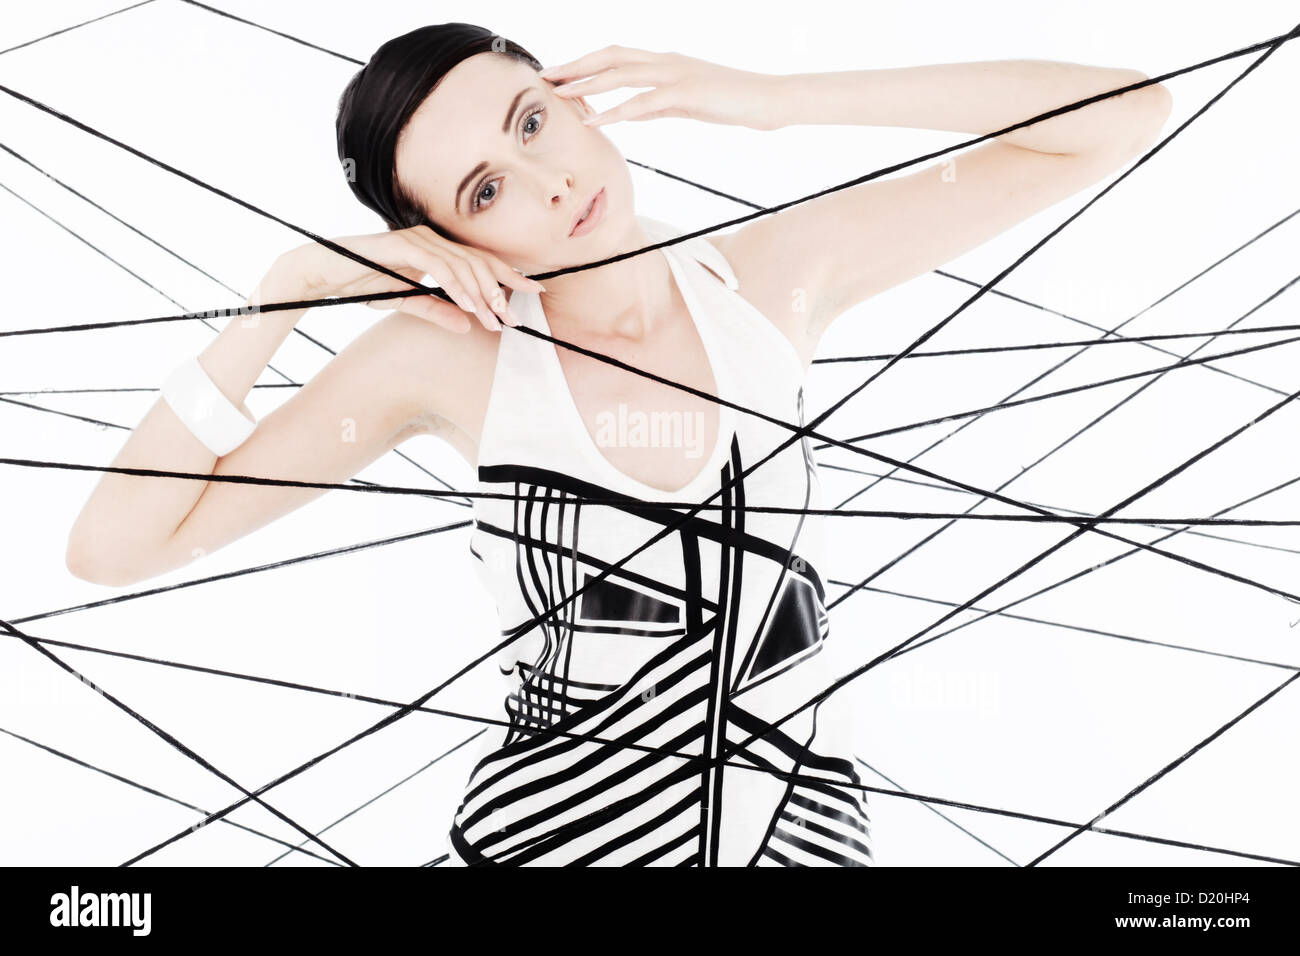 Woman, 24, dressed in the style of the 60s, standing between spanned threads, symbolic image network Stock Photo